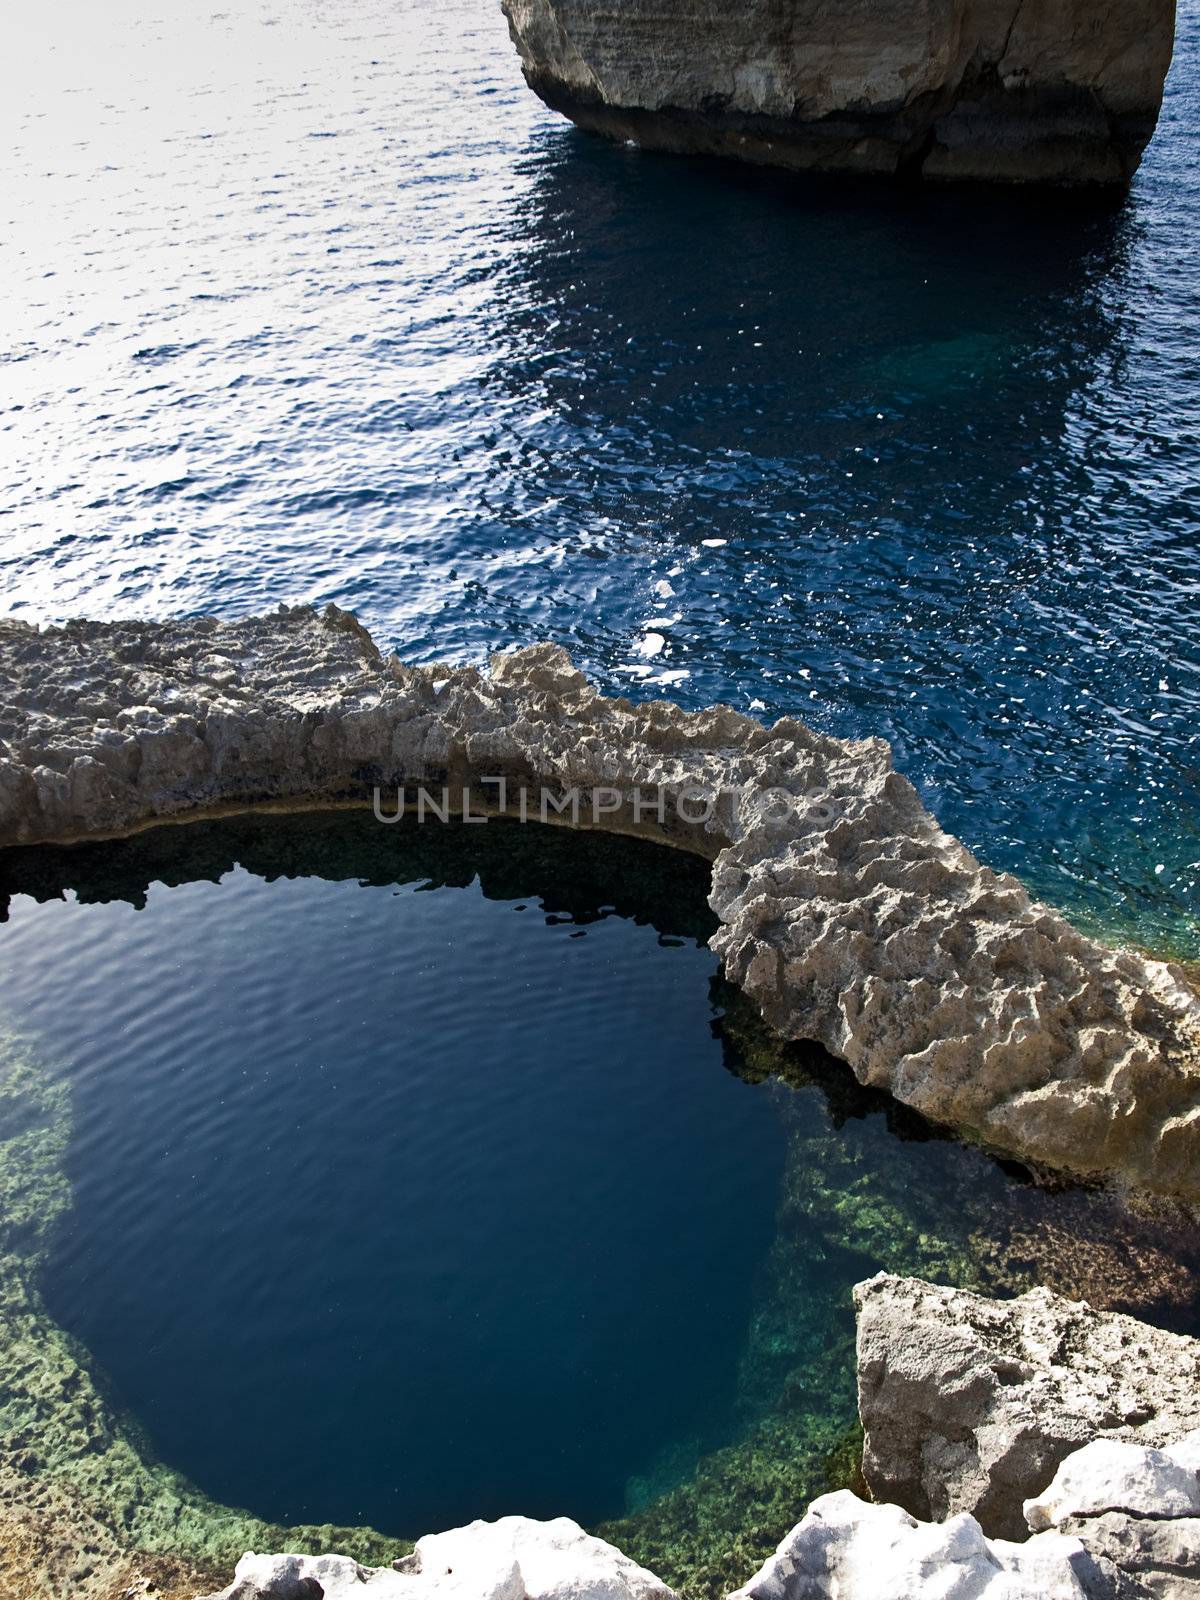 The Blue Hole is the most popular diving site in the Mediterranean on the island of Gozo in Malta